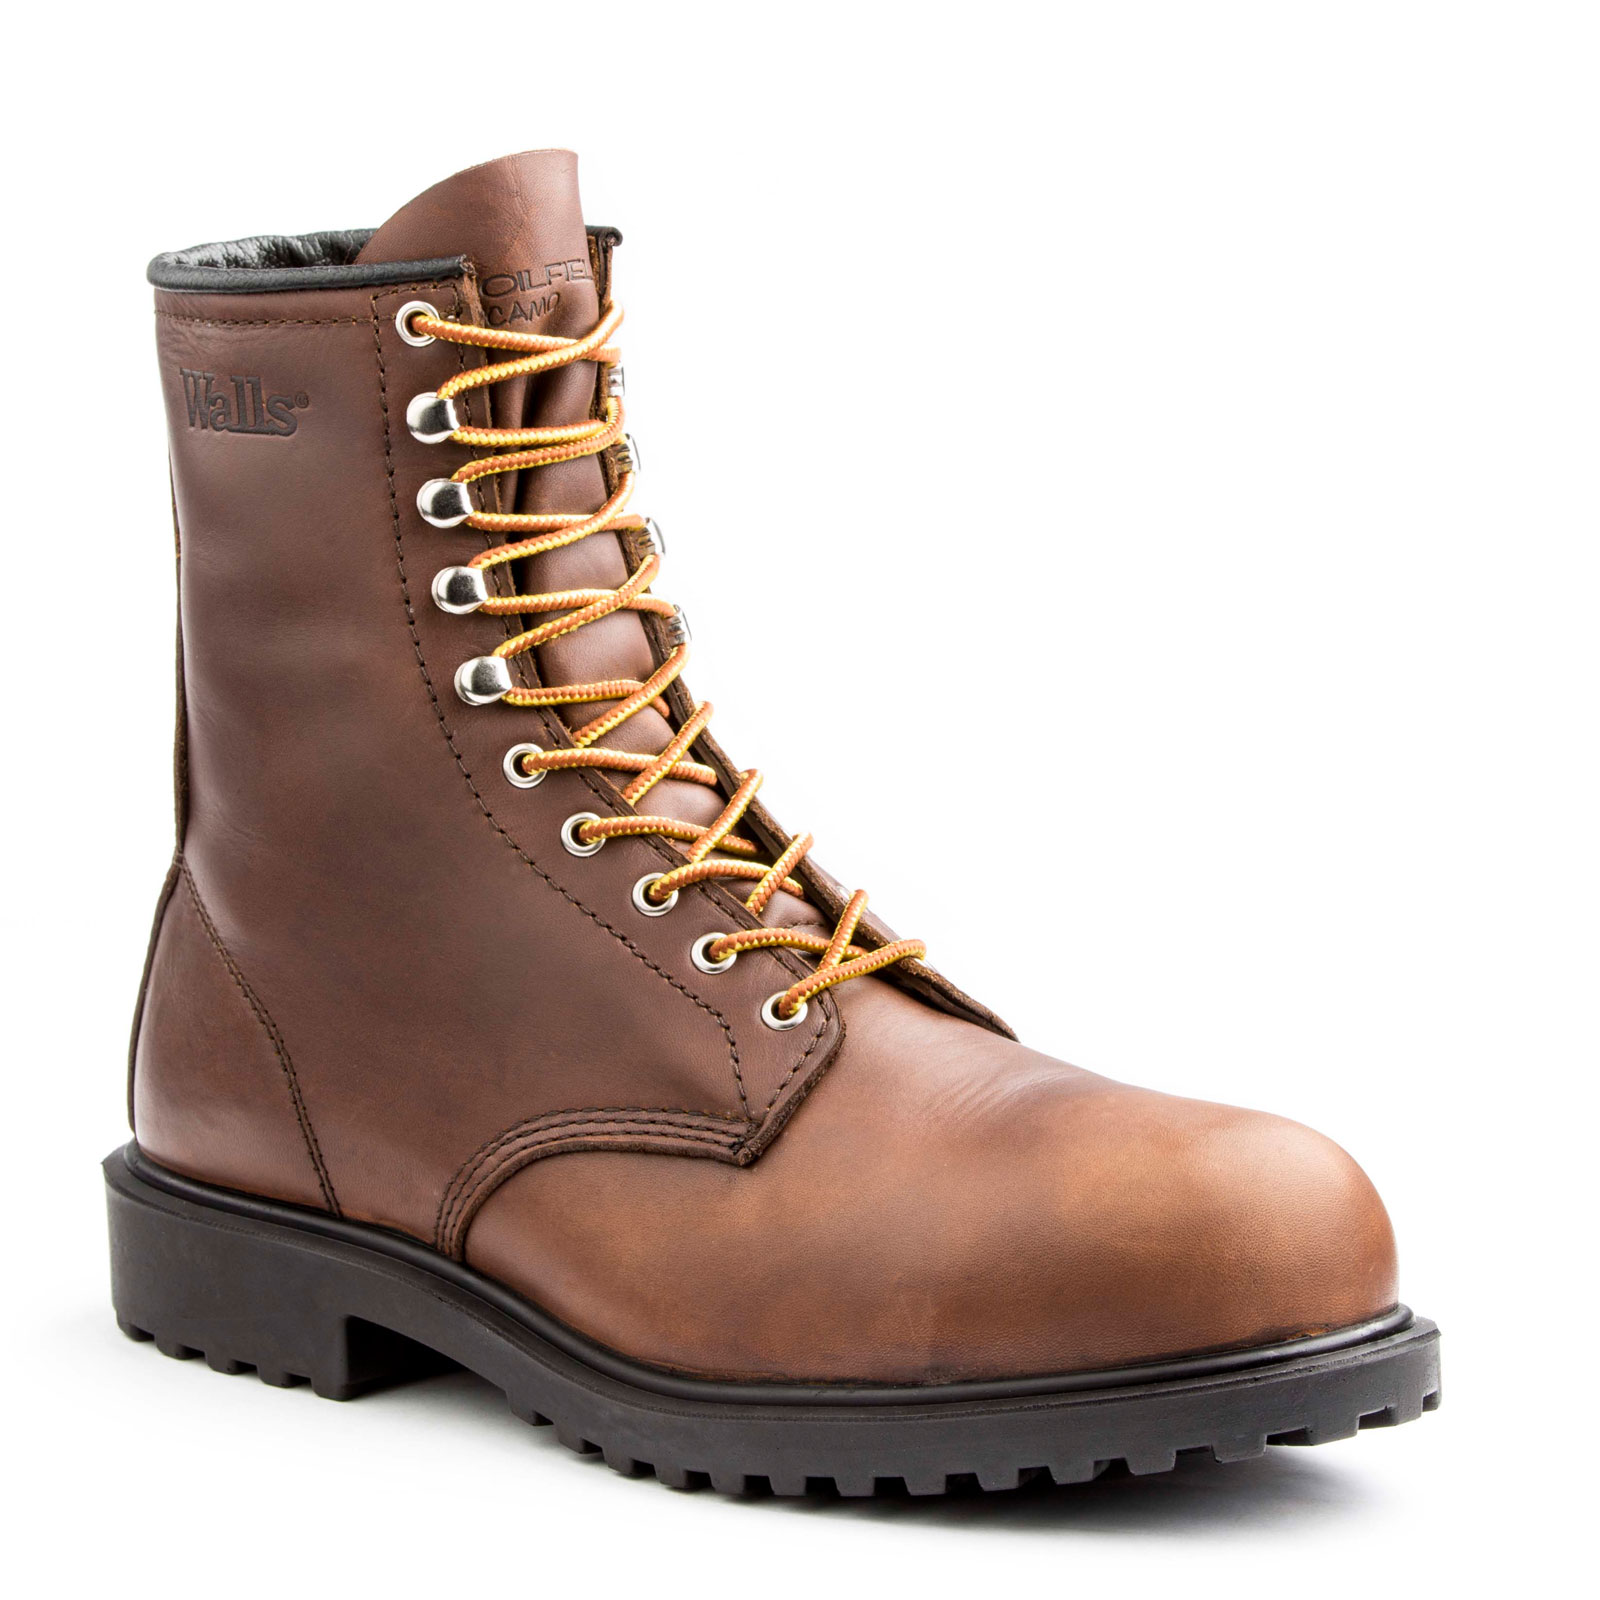 Men's 8" Lace-Up Daxton Work Boot Wide Widths Available